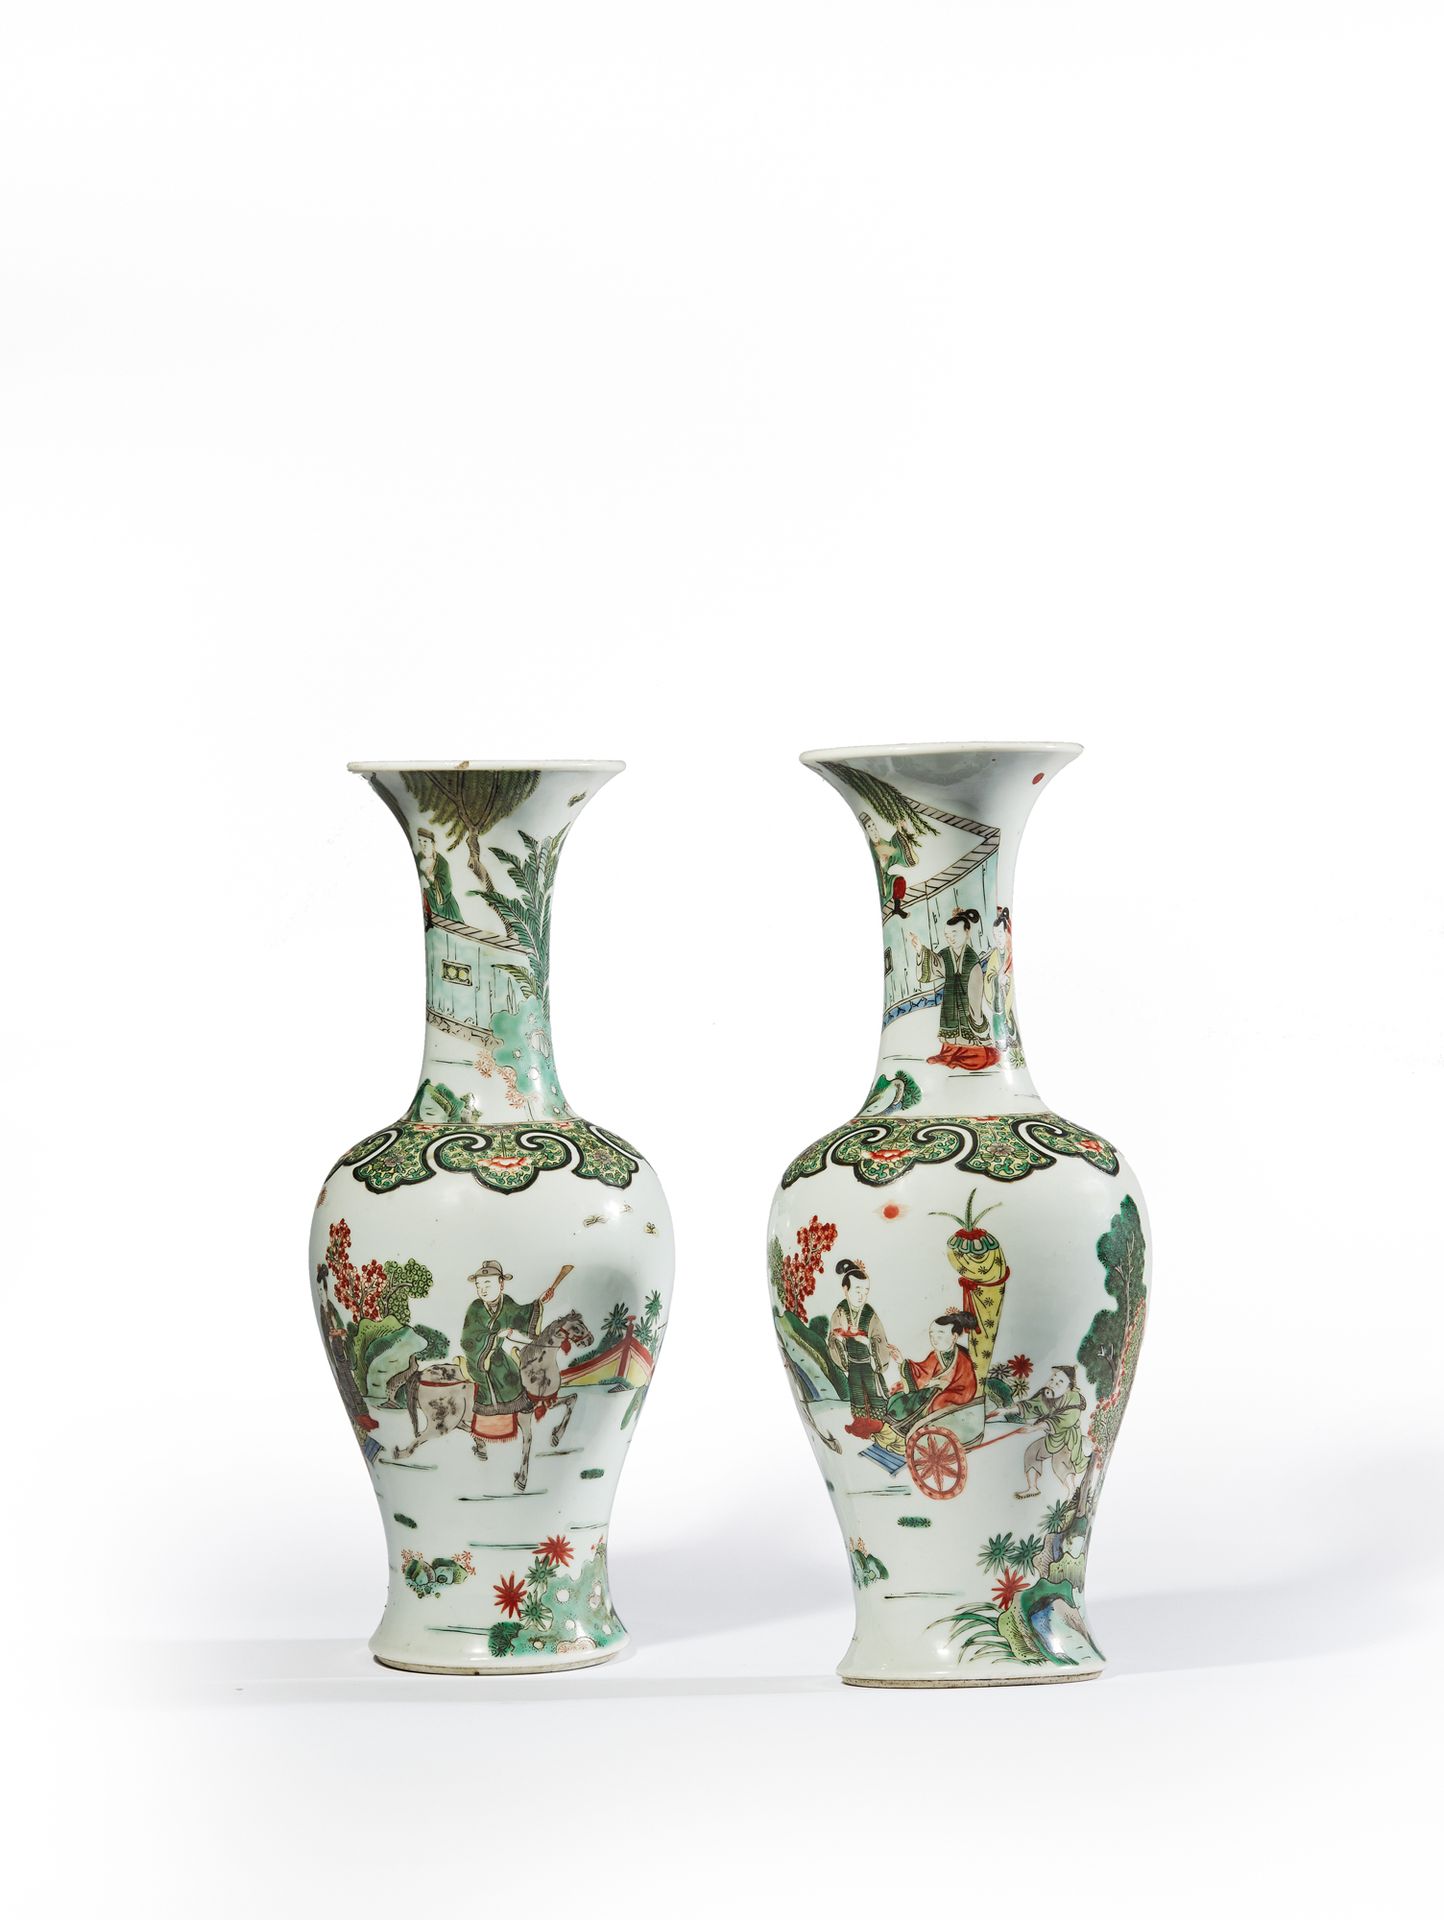 CHINE - Fin XIXe siècle Pair of flared neck porcelain vases decorated in polychr&hellip;